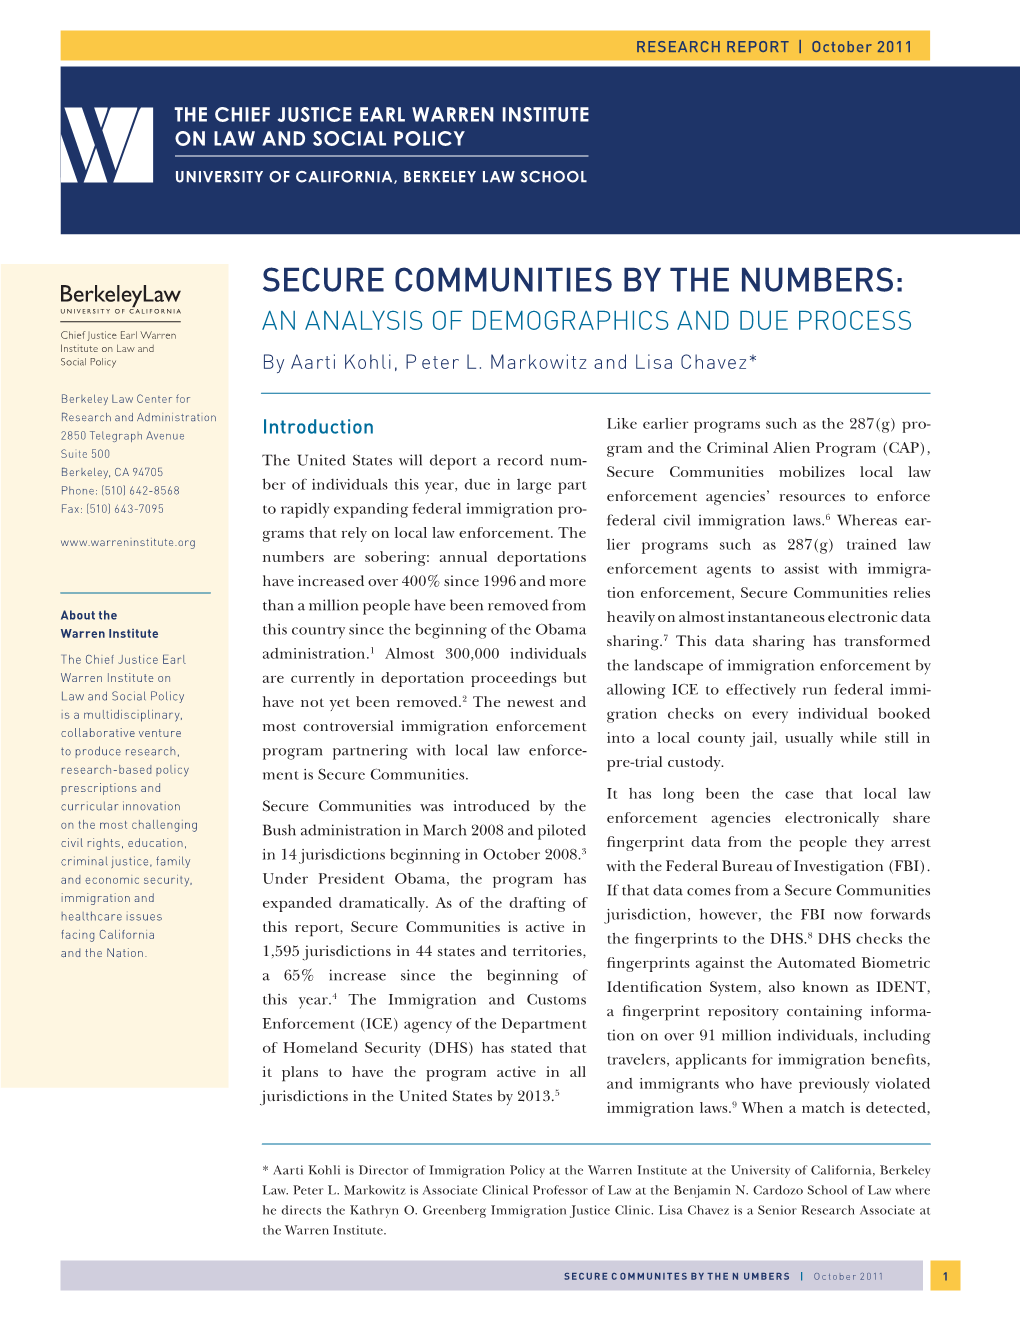 Secure Communities by the Numbers: UNIVERSITY of CALIFORNIA